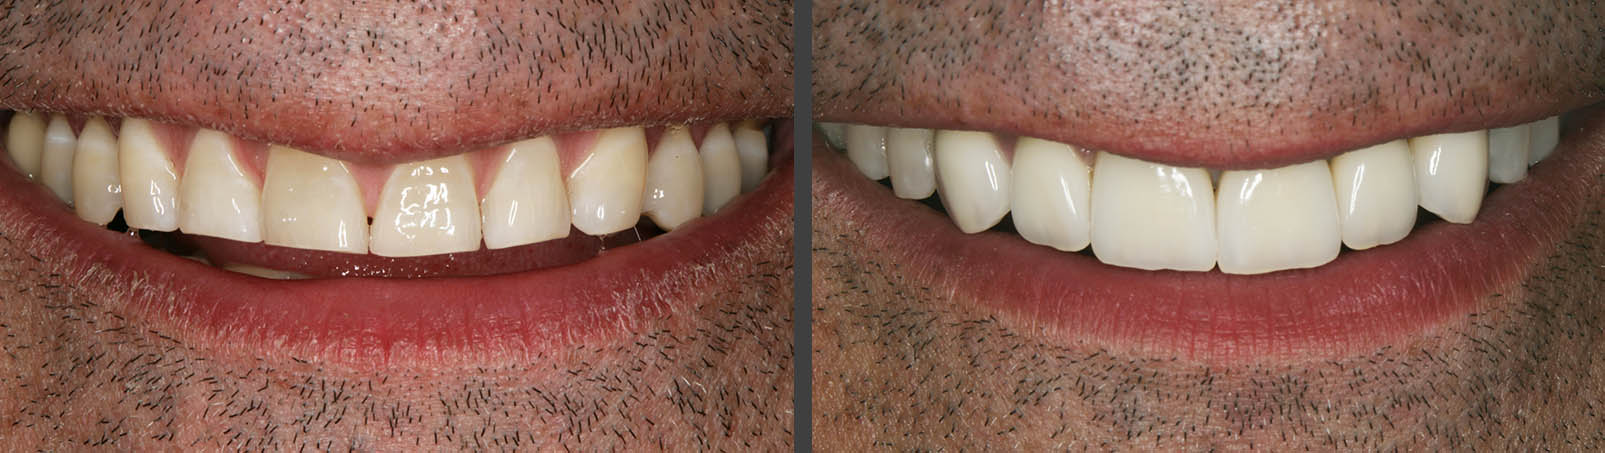 Veneers | Cosmetic Dentistry Before And After | Bunker Hill Dentistry | Houston,, TX